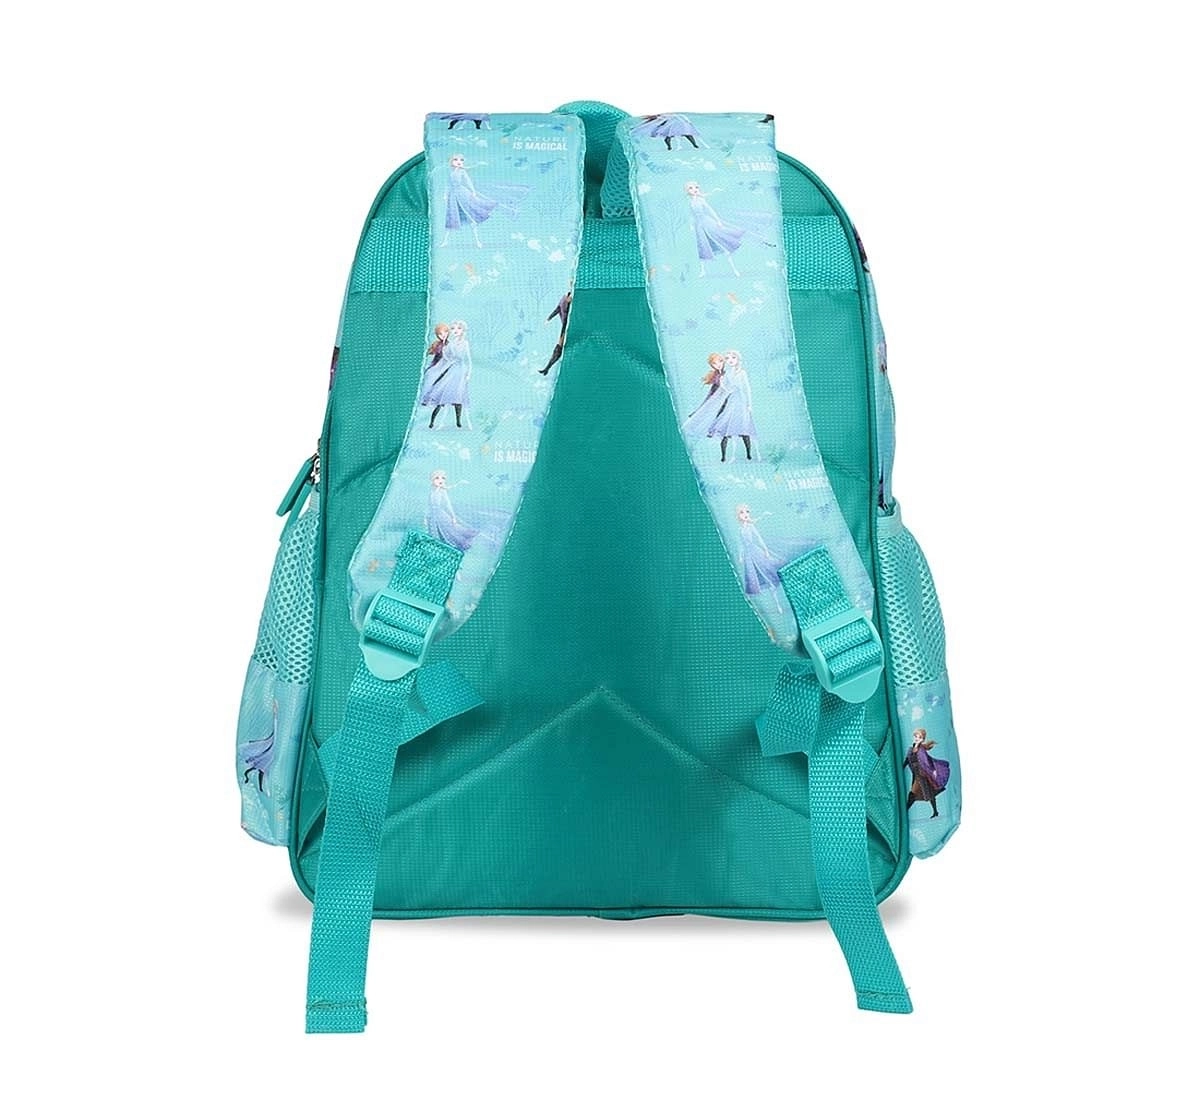 Excel Production Frozen2 Believe In The Journey School Bag 36 Cm Bags for Age 3Y+ (Turquoise)